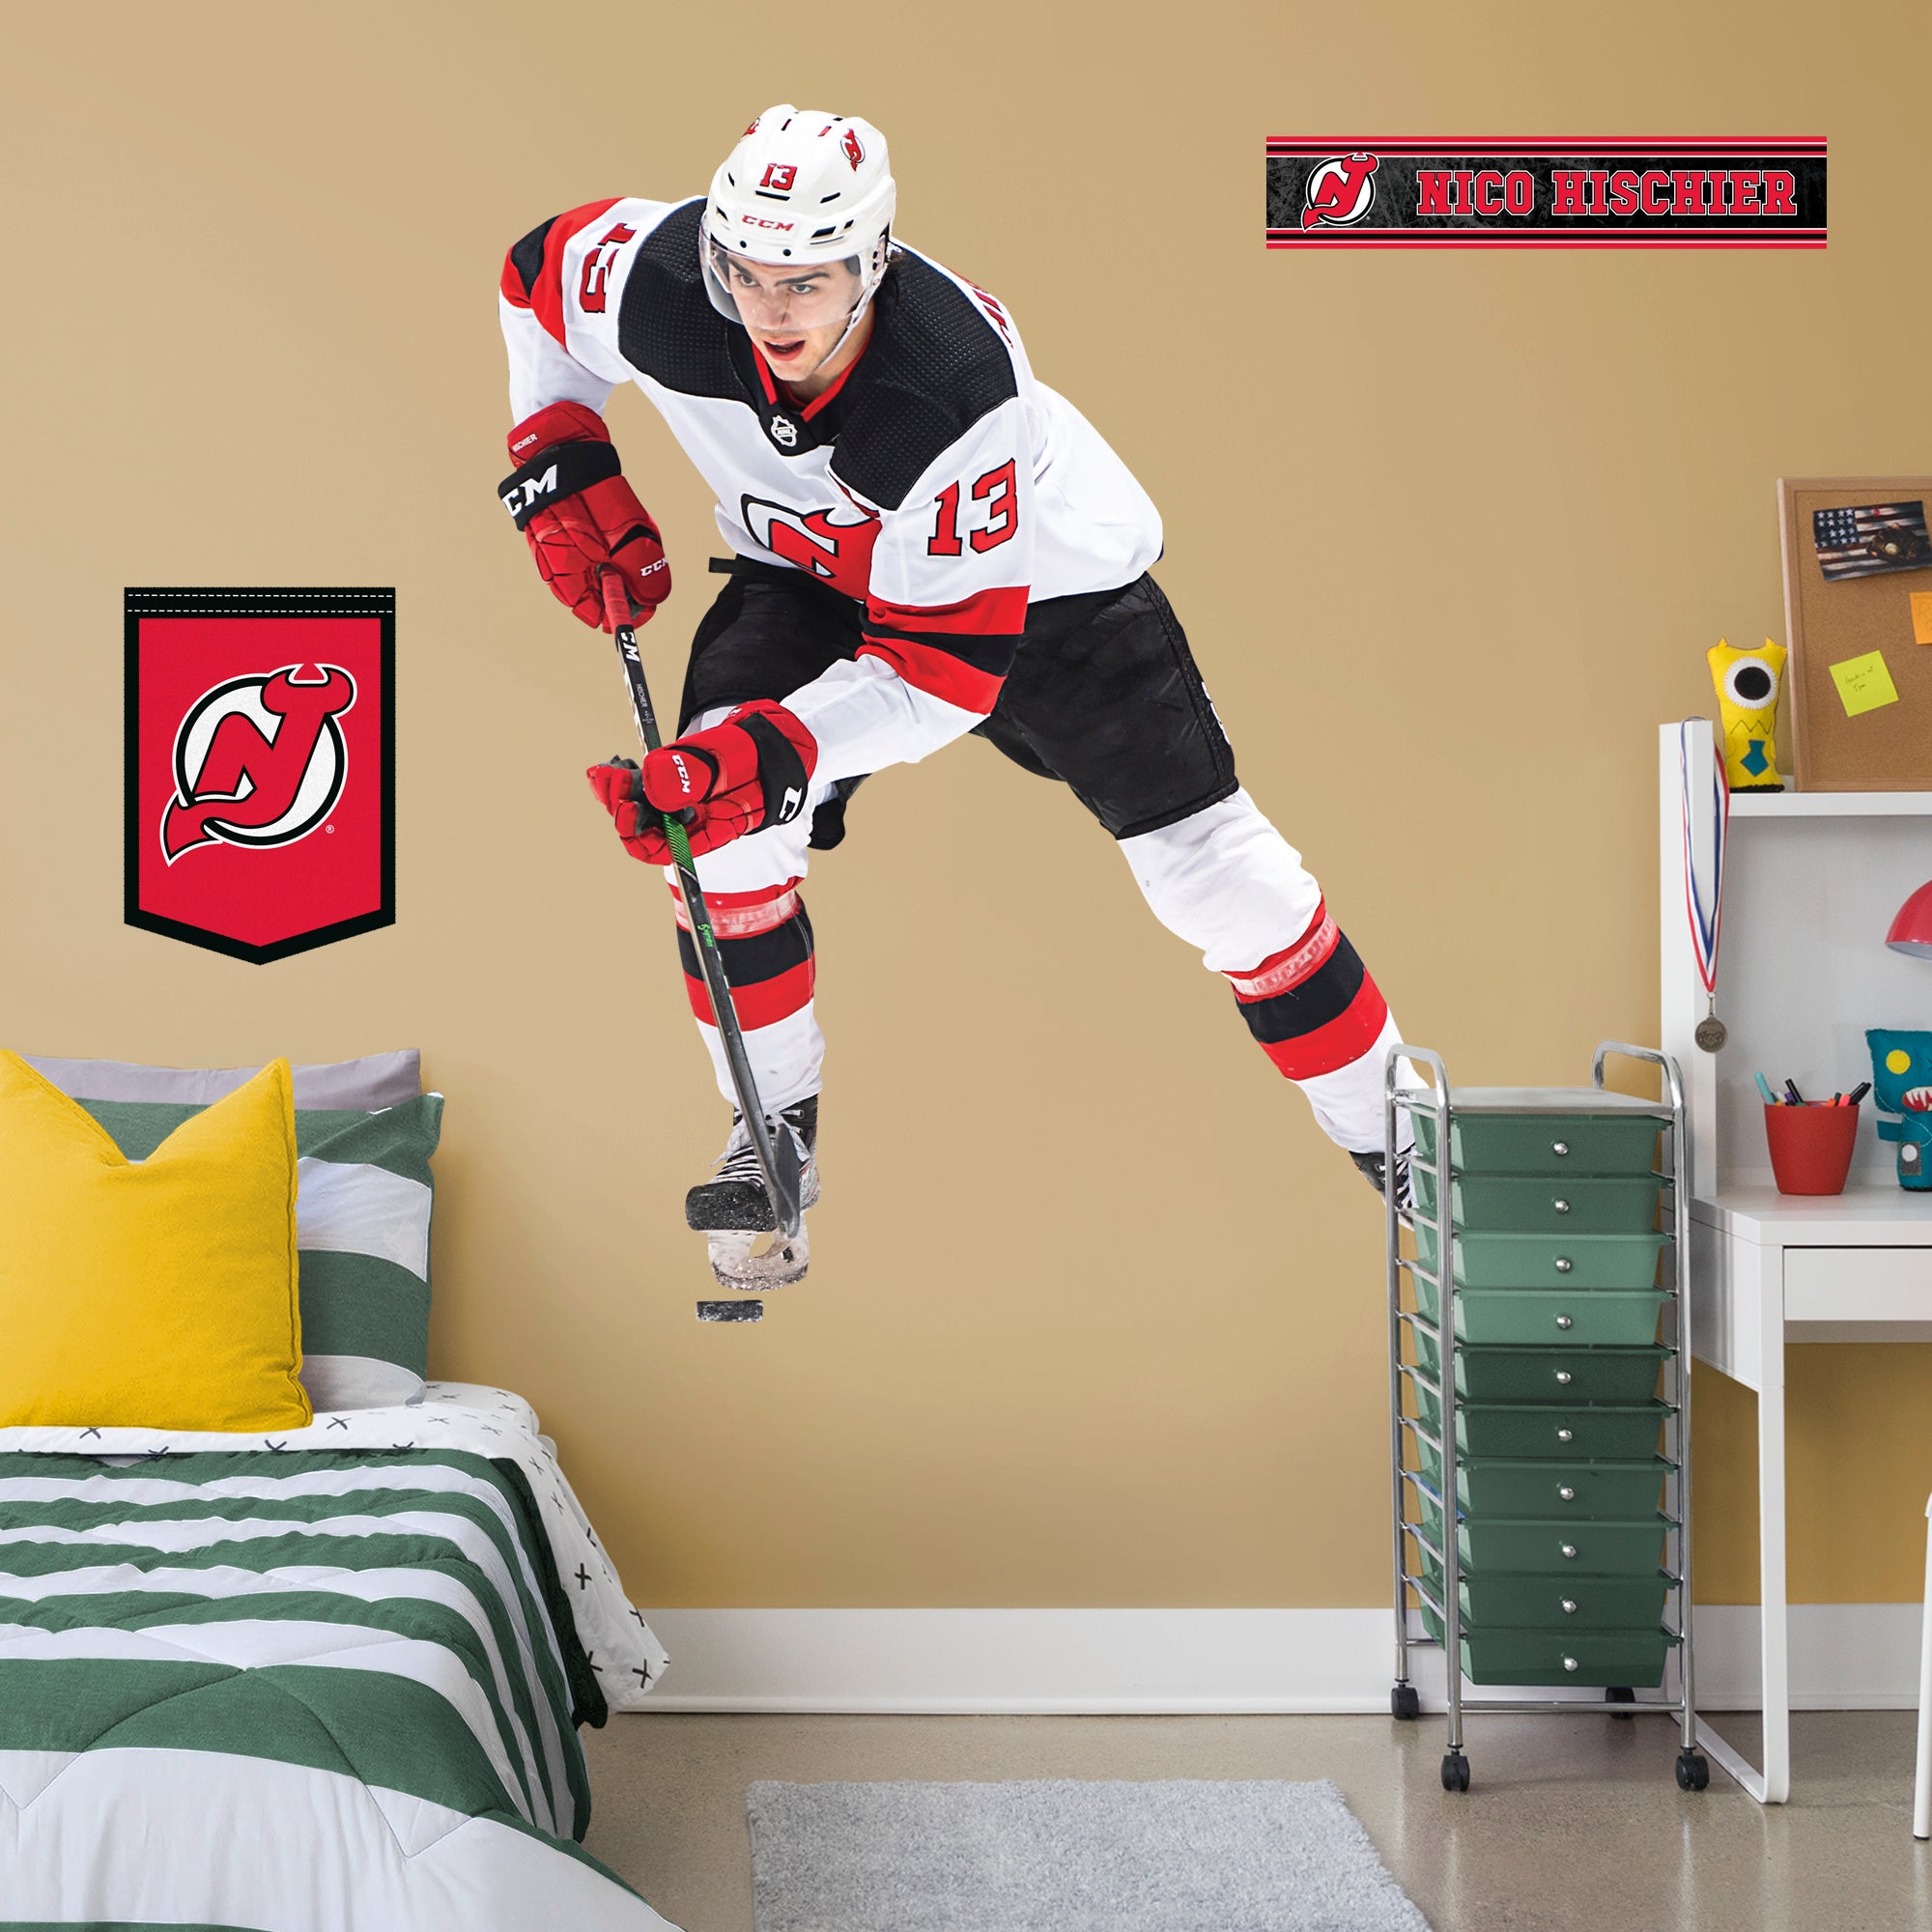 Nico Hischier for New Jersey Devils: RealBig Officially Licensed NHL Removable Wall Decal Life-Size Athlete + 2 Decals (59"W x 6